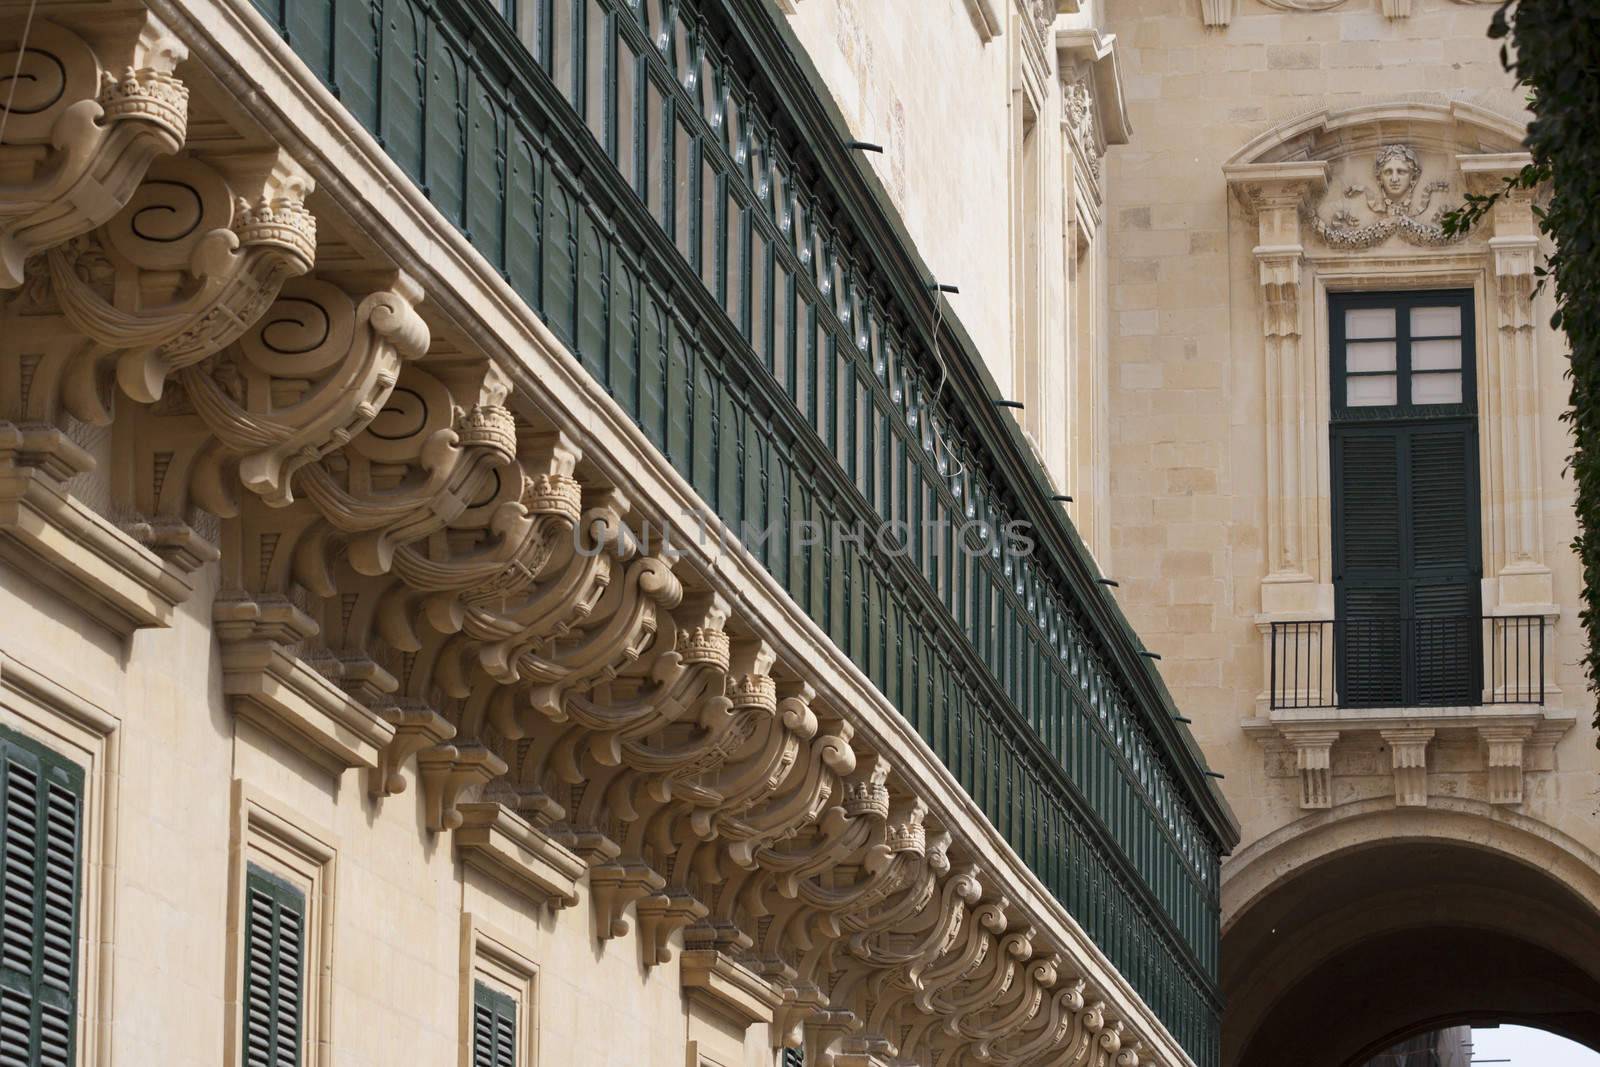 Traditional wooden balcony on an old palace in Valletta, Europe, which used to house the Grandmaster of the Order of St John, the temple knights